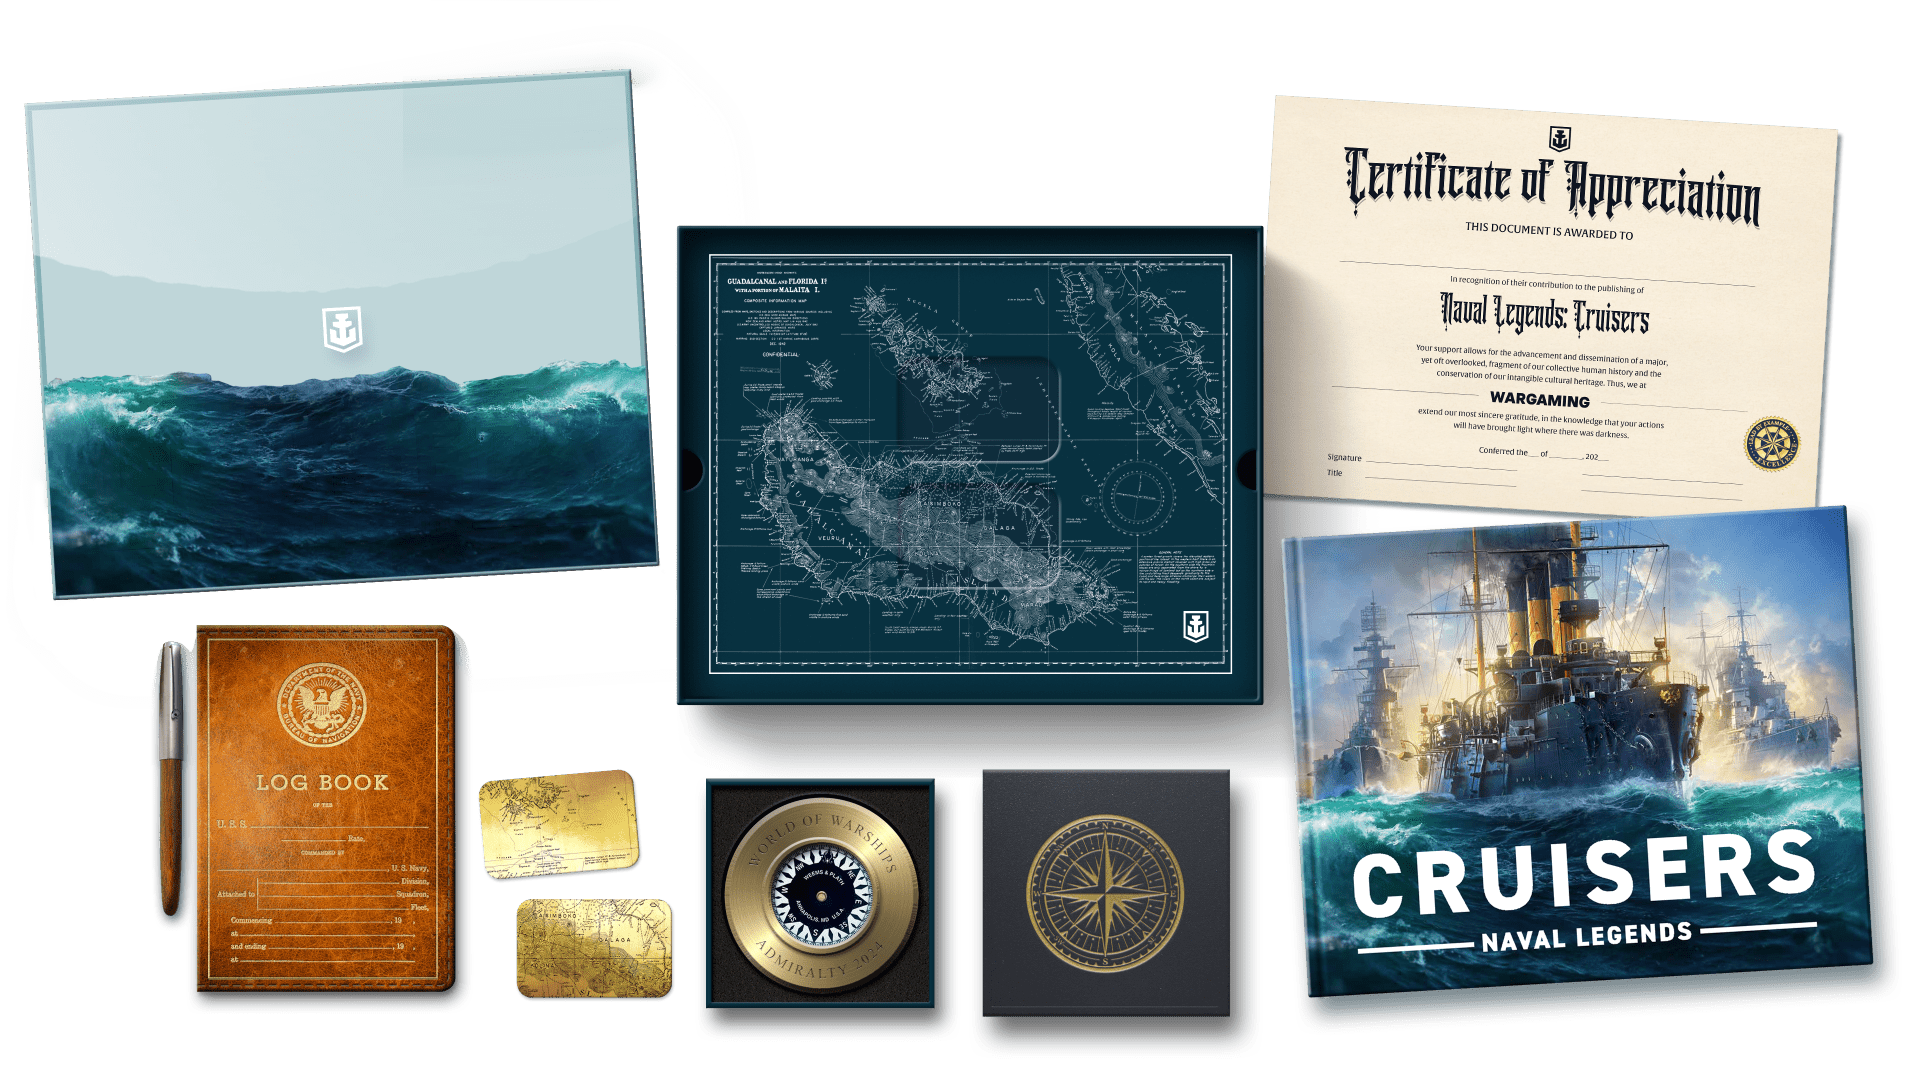 World of Warships Naval Legends: Cruisers Book Pre-Order Now Available Thru Dec. 14